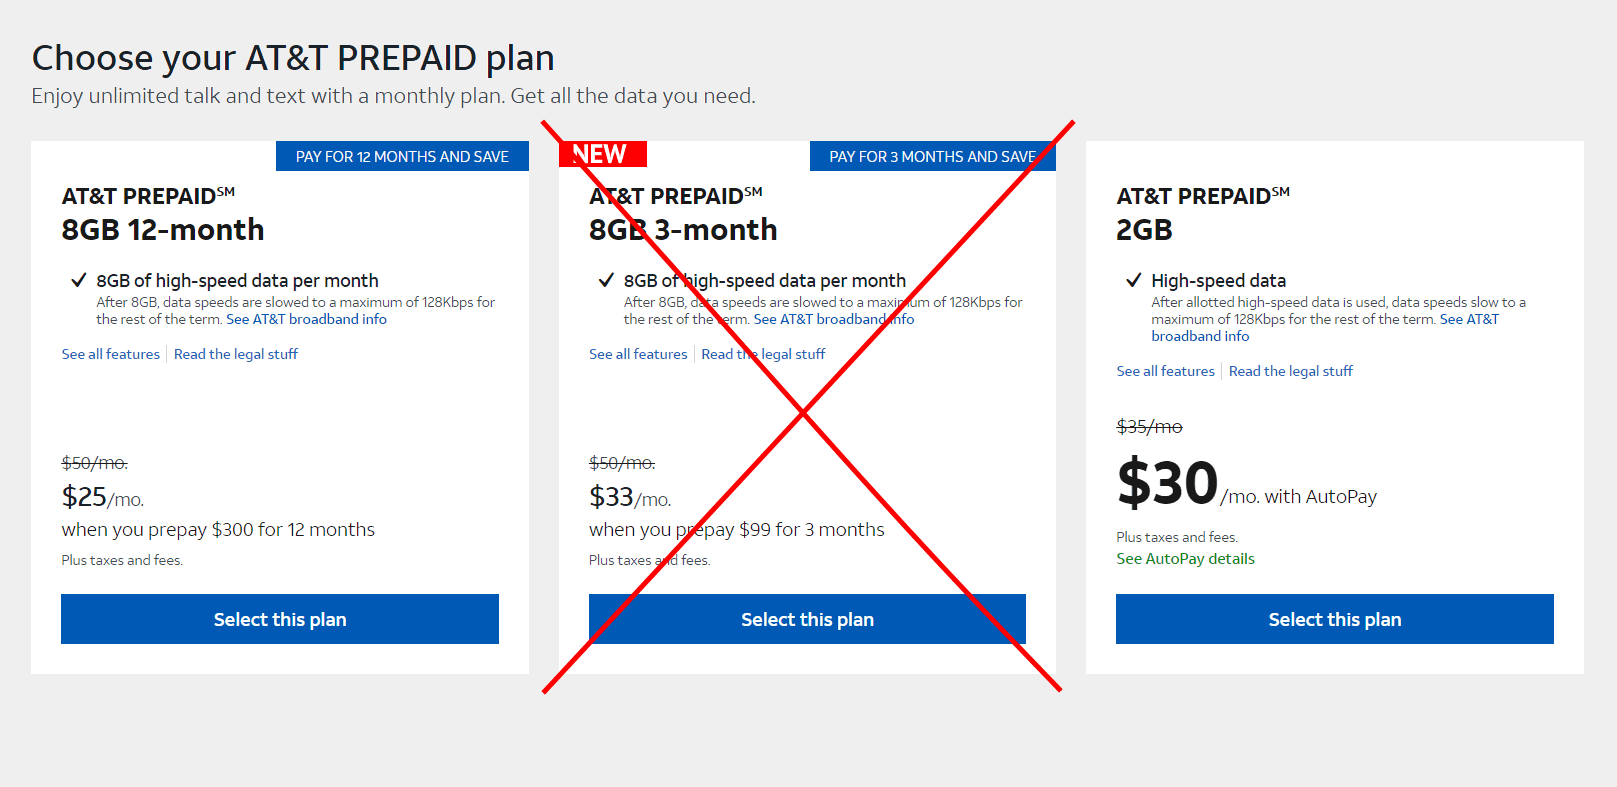 ATT Prepaid Appears To Have Eliminated A Couple Of Plans To Start 2021